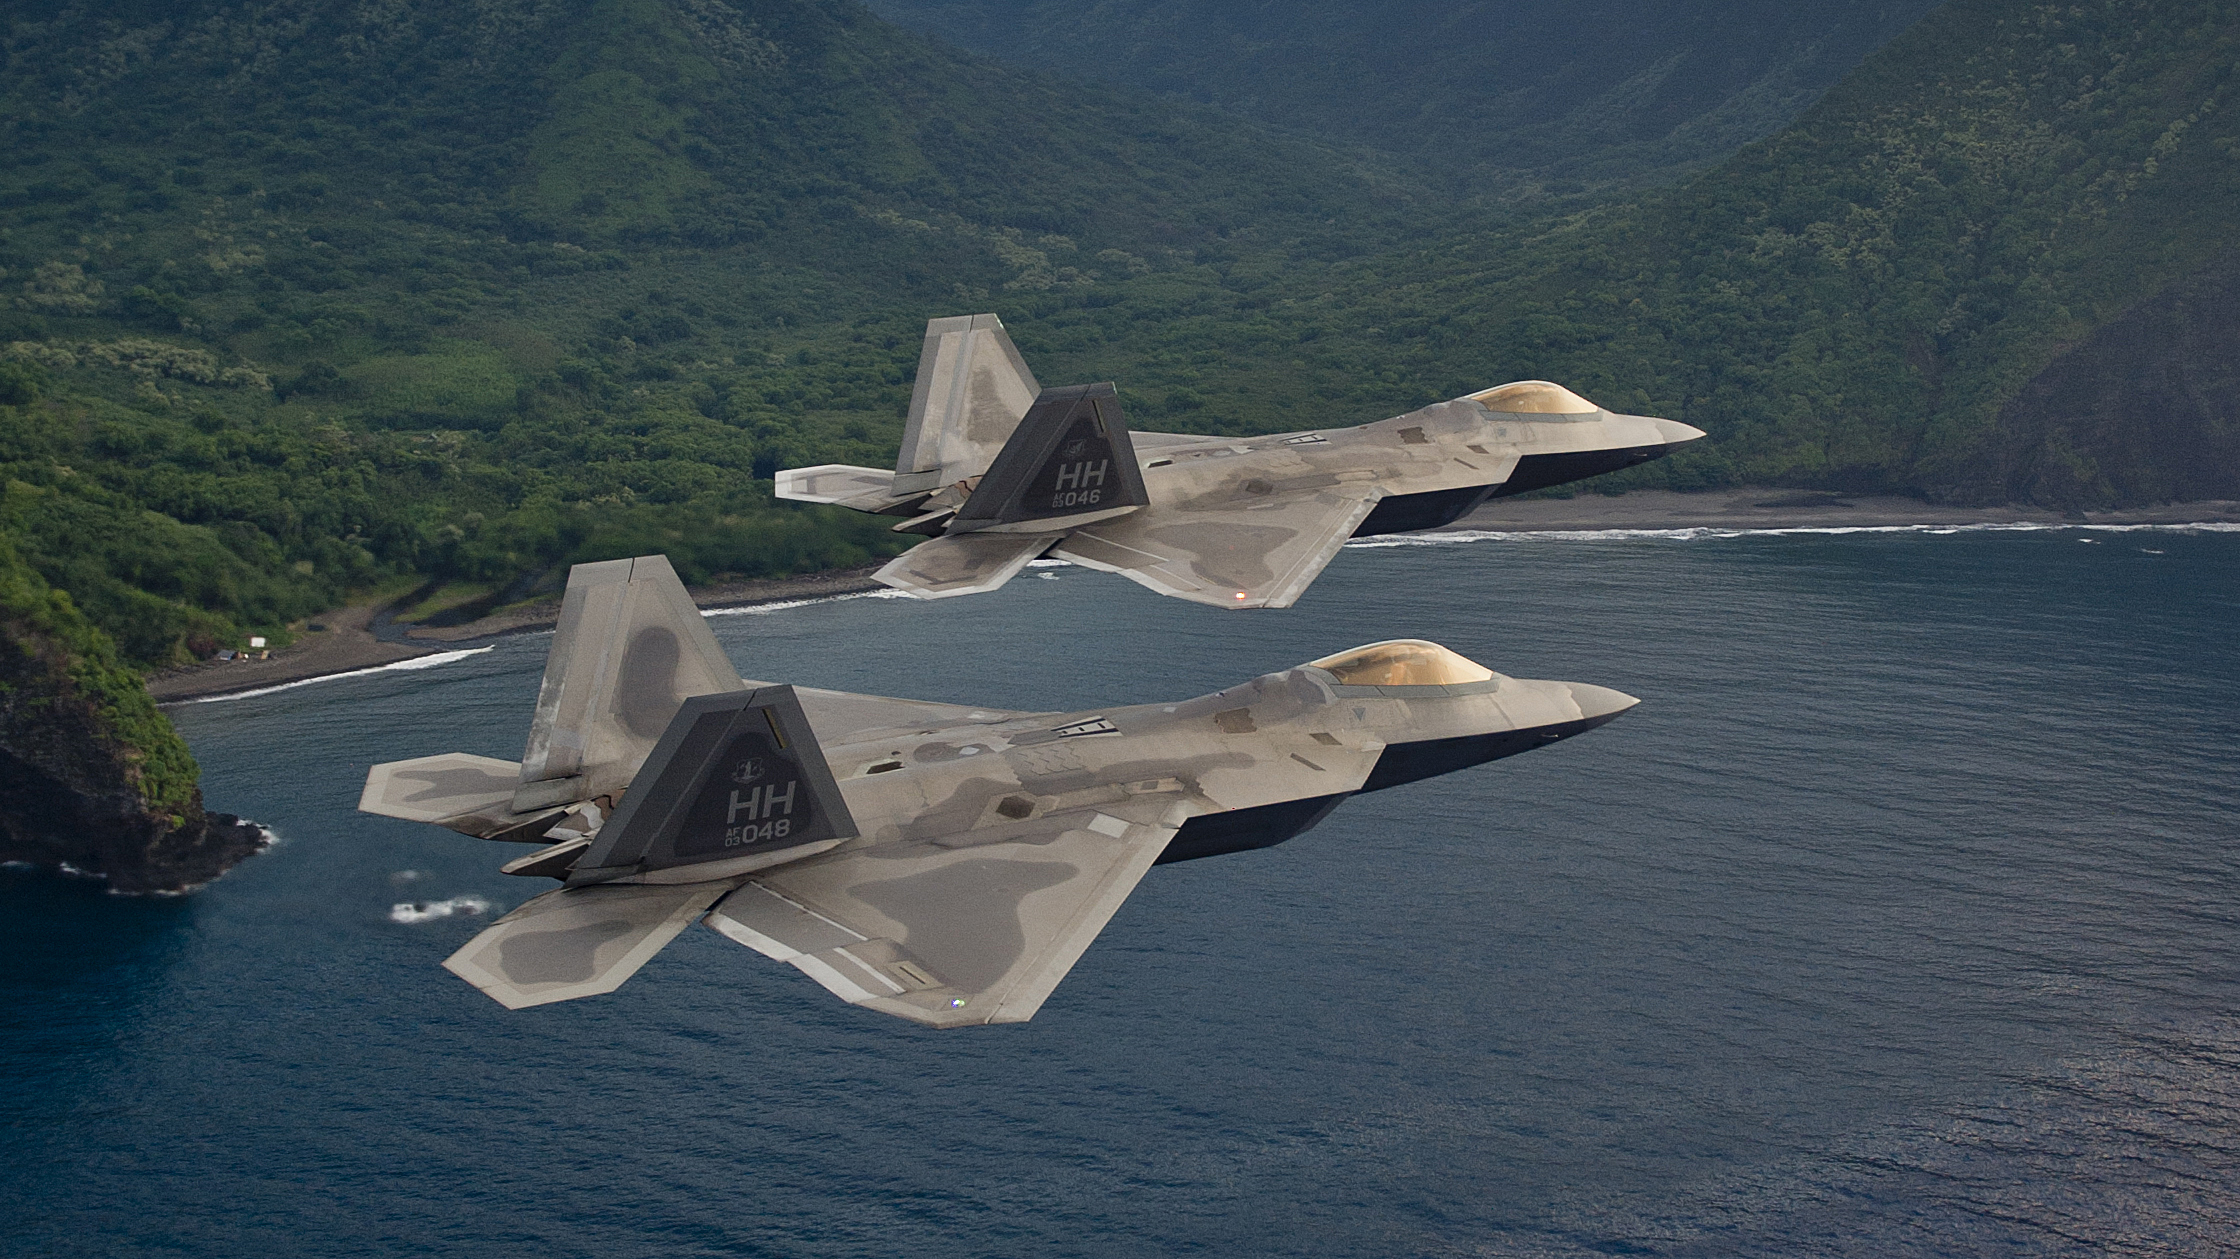 LOCKHEED MARTIN F-22 RAPTOR FIGHTER JET PHOTO AIR FORCE MILITARY AVIATION POWER 